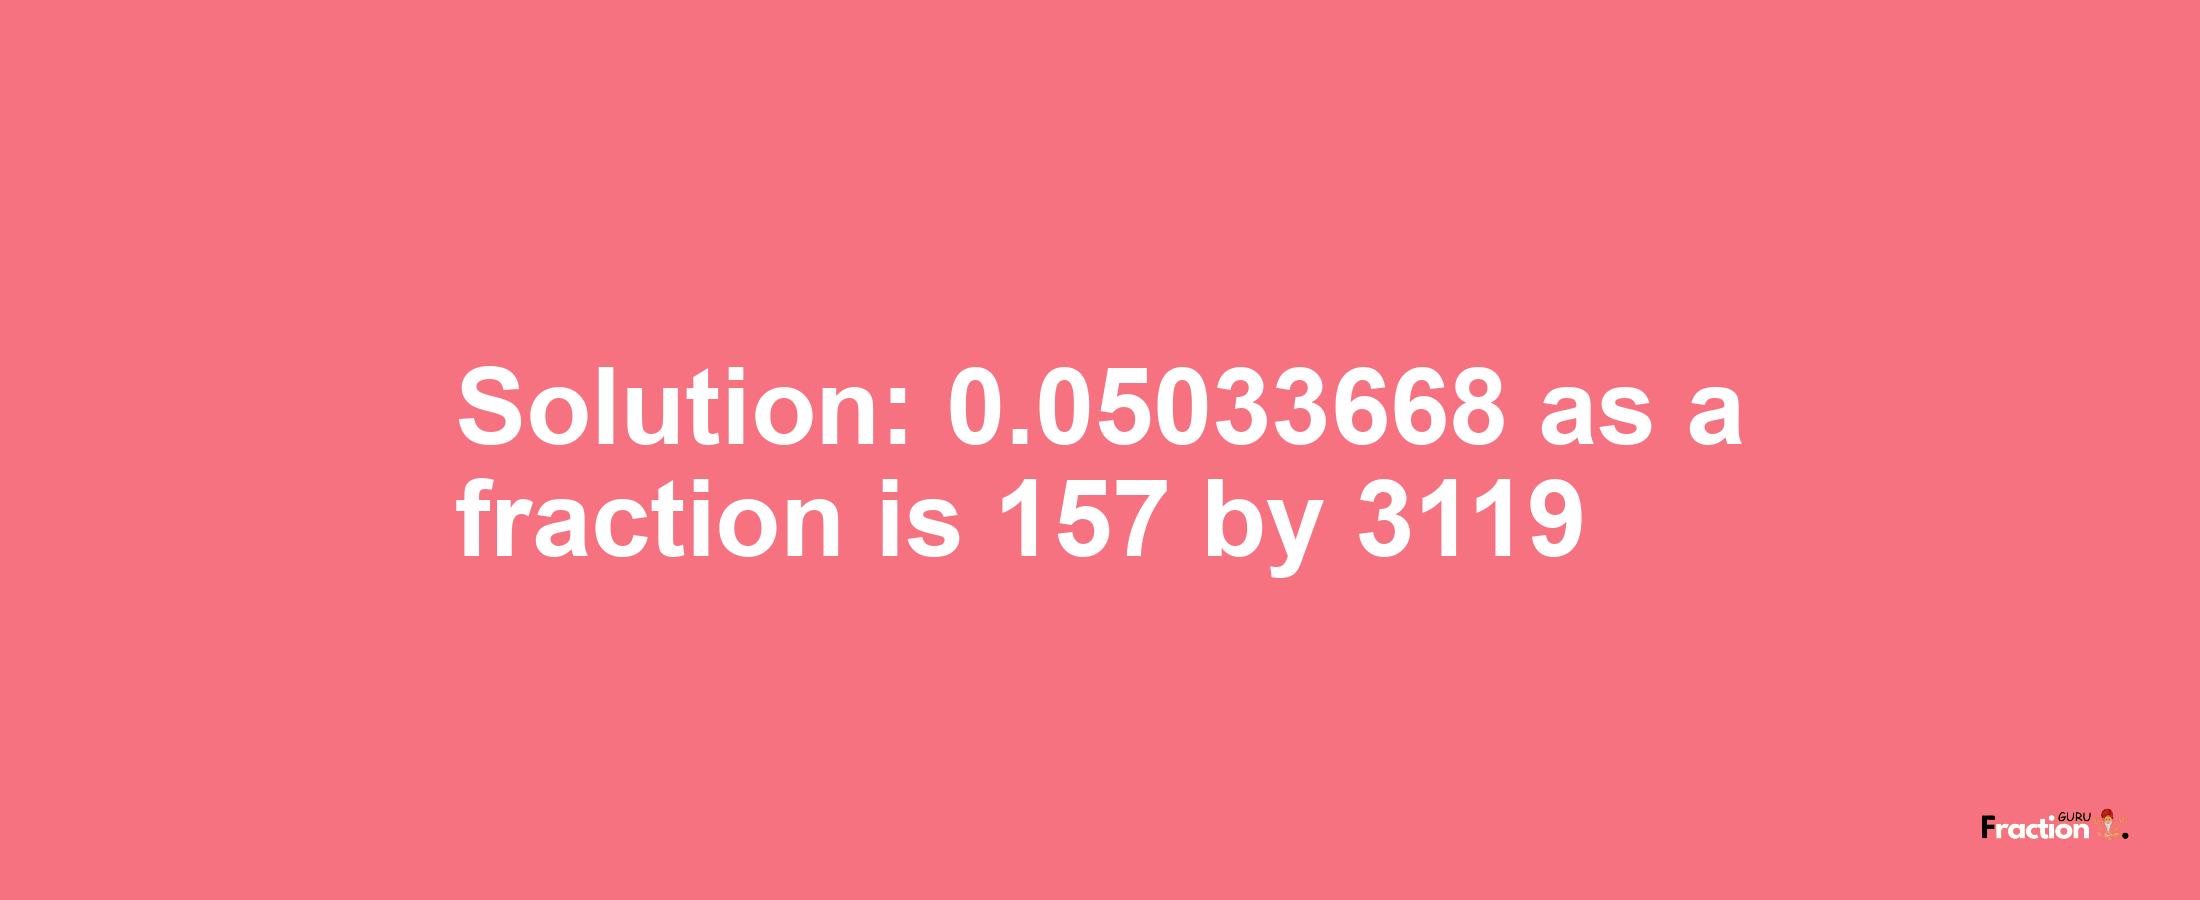 Solution:0.05033668 as a fraction is 157/3119